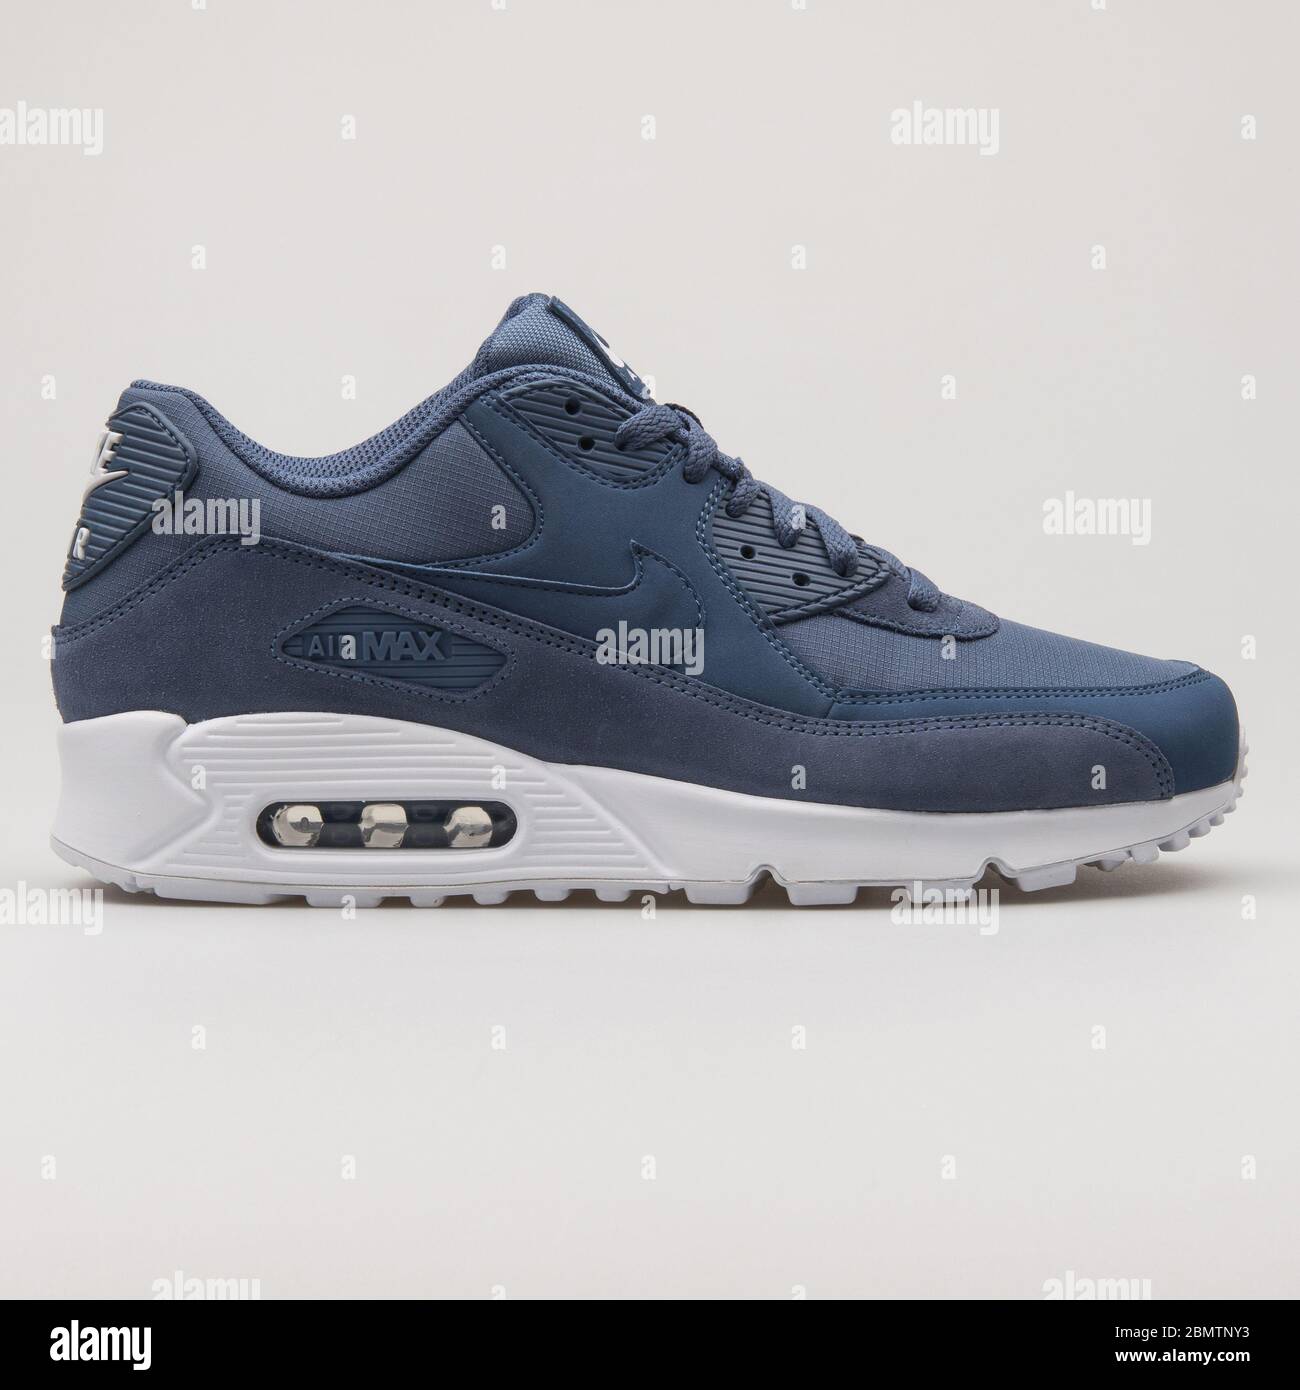 VIENNA, AUSTRIA - FEBRUARY 19, 2018: Nike Air Max 90 Essential blue and  white sneaker on white background Stock Photo - Alamy